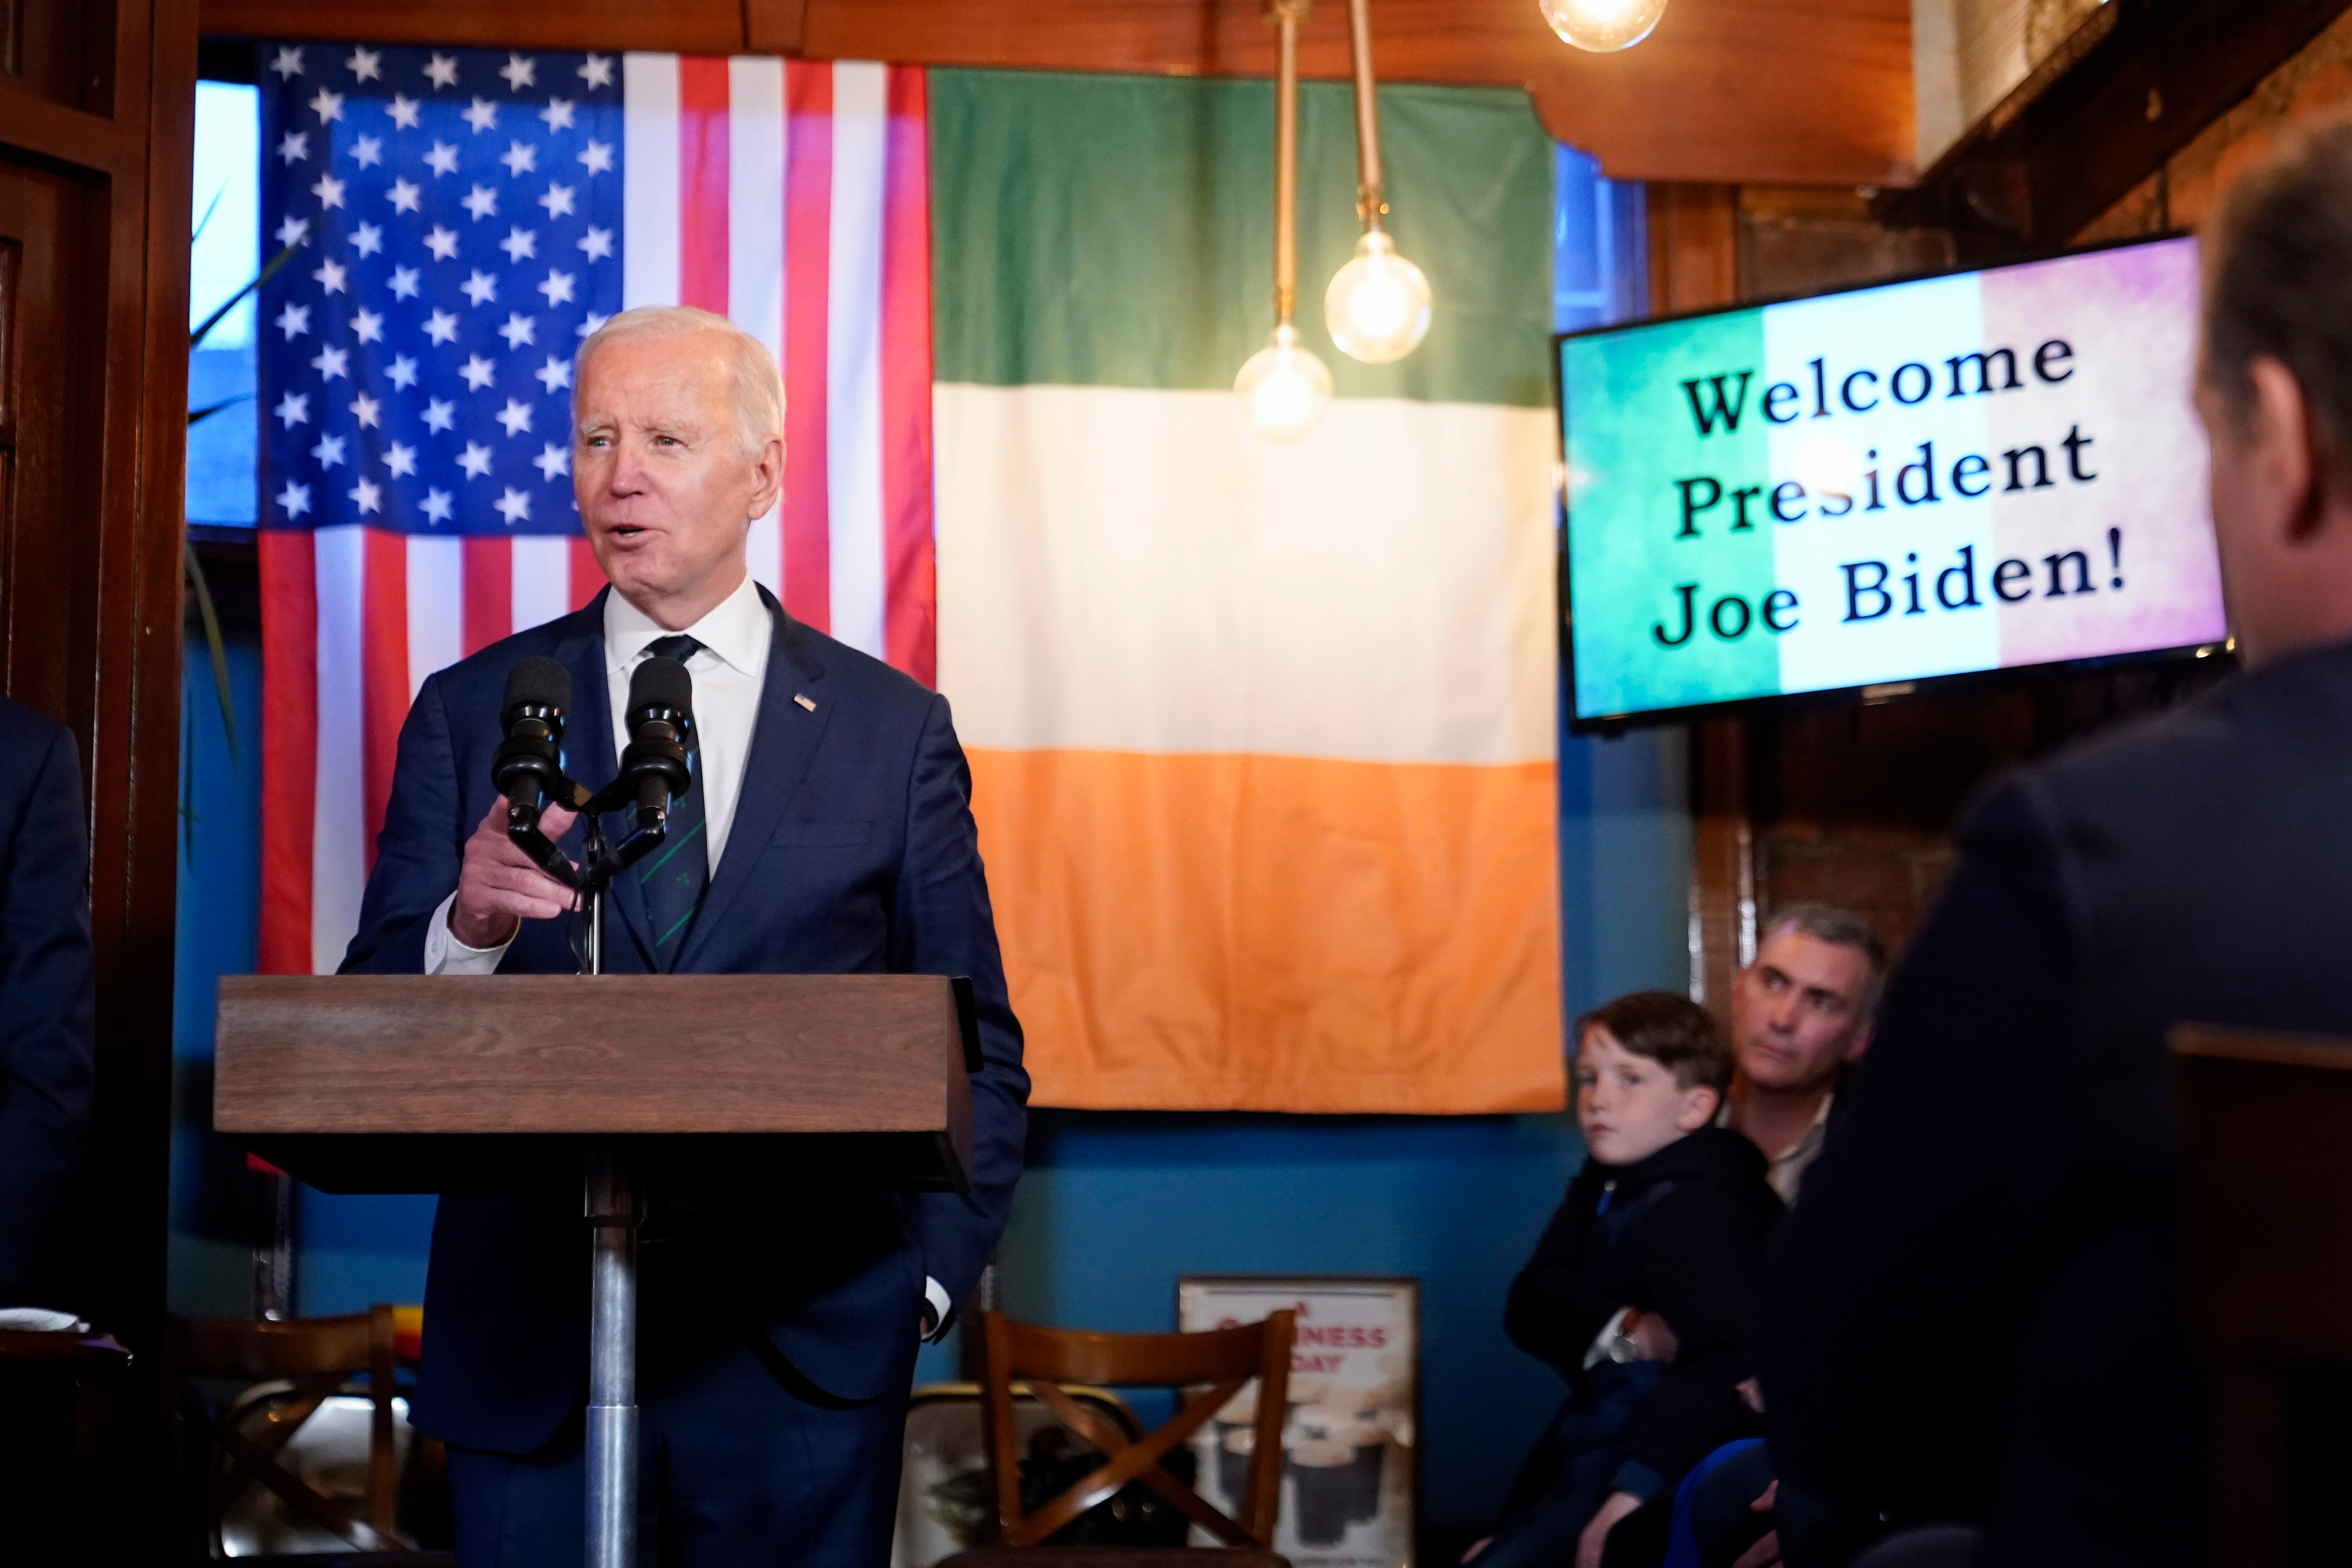 From Ireland, Biden confused a rugby team with Black and Tans British military group – and the English didnt like it